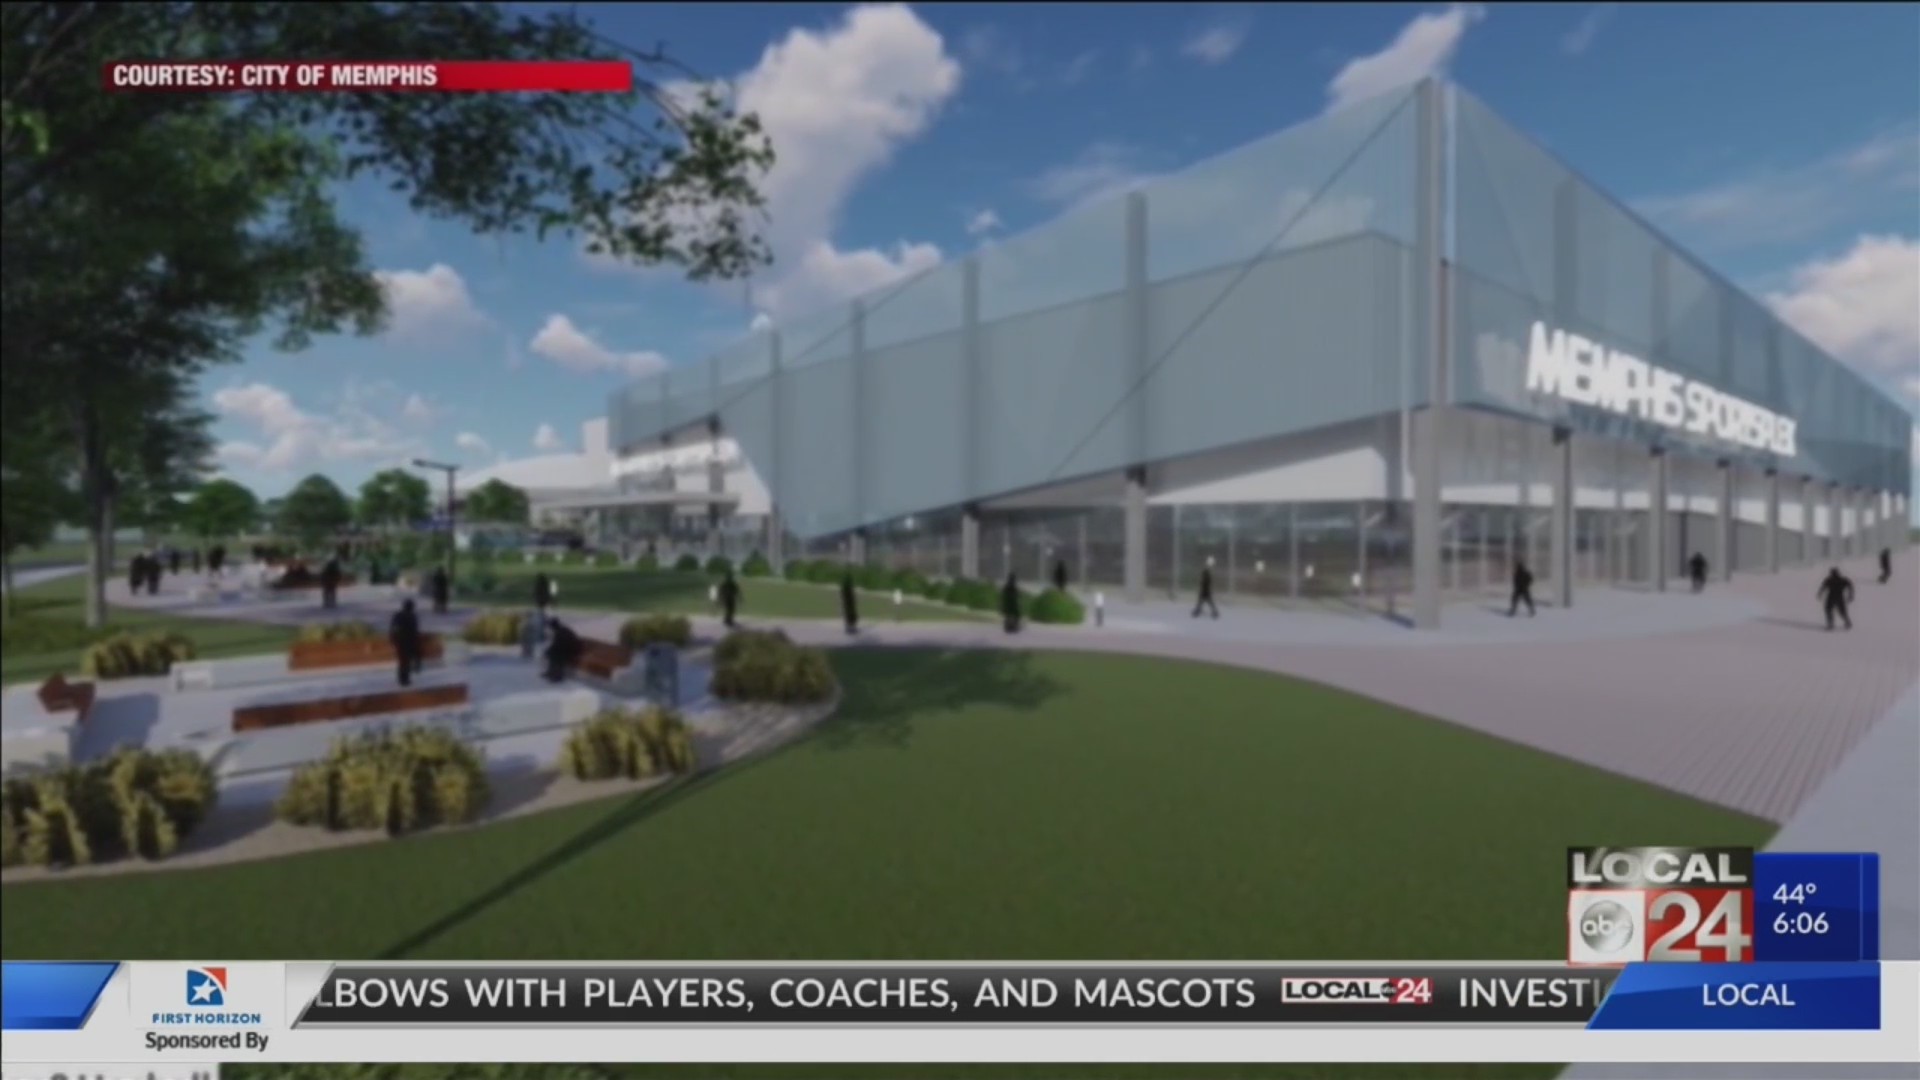 Plans underway to redevelop the fairgrounds for sports, retail, and a hotel